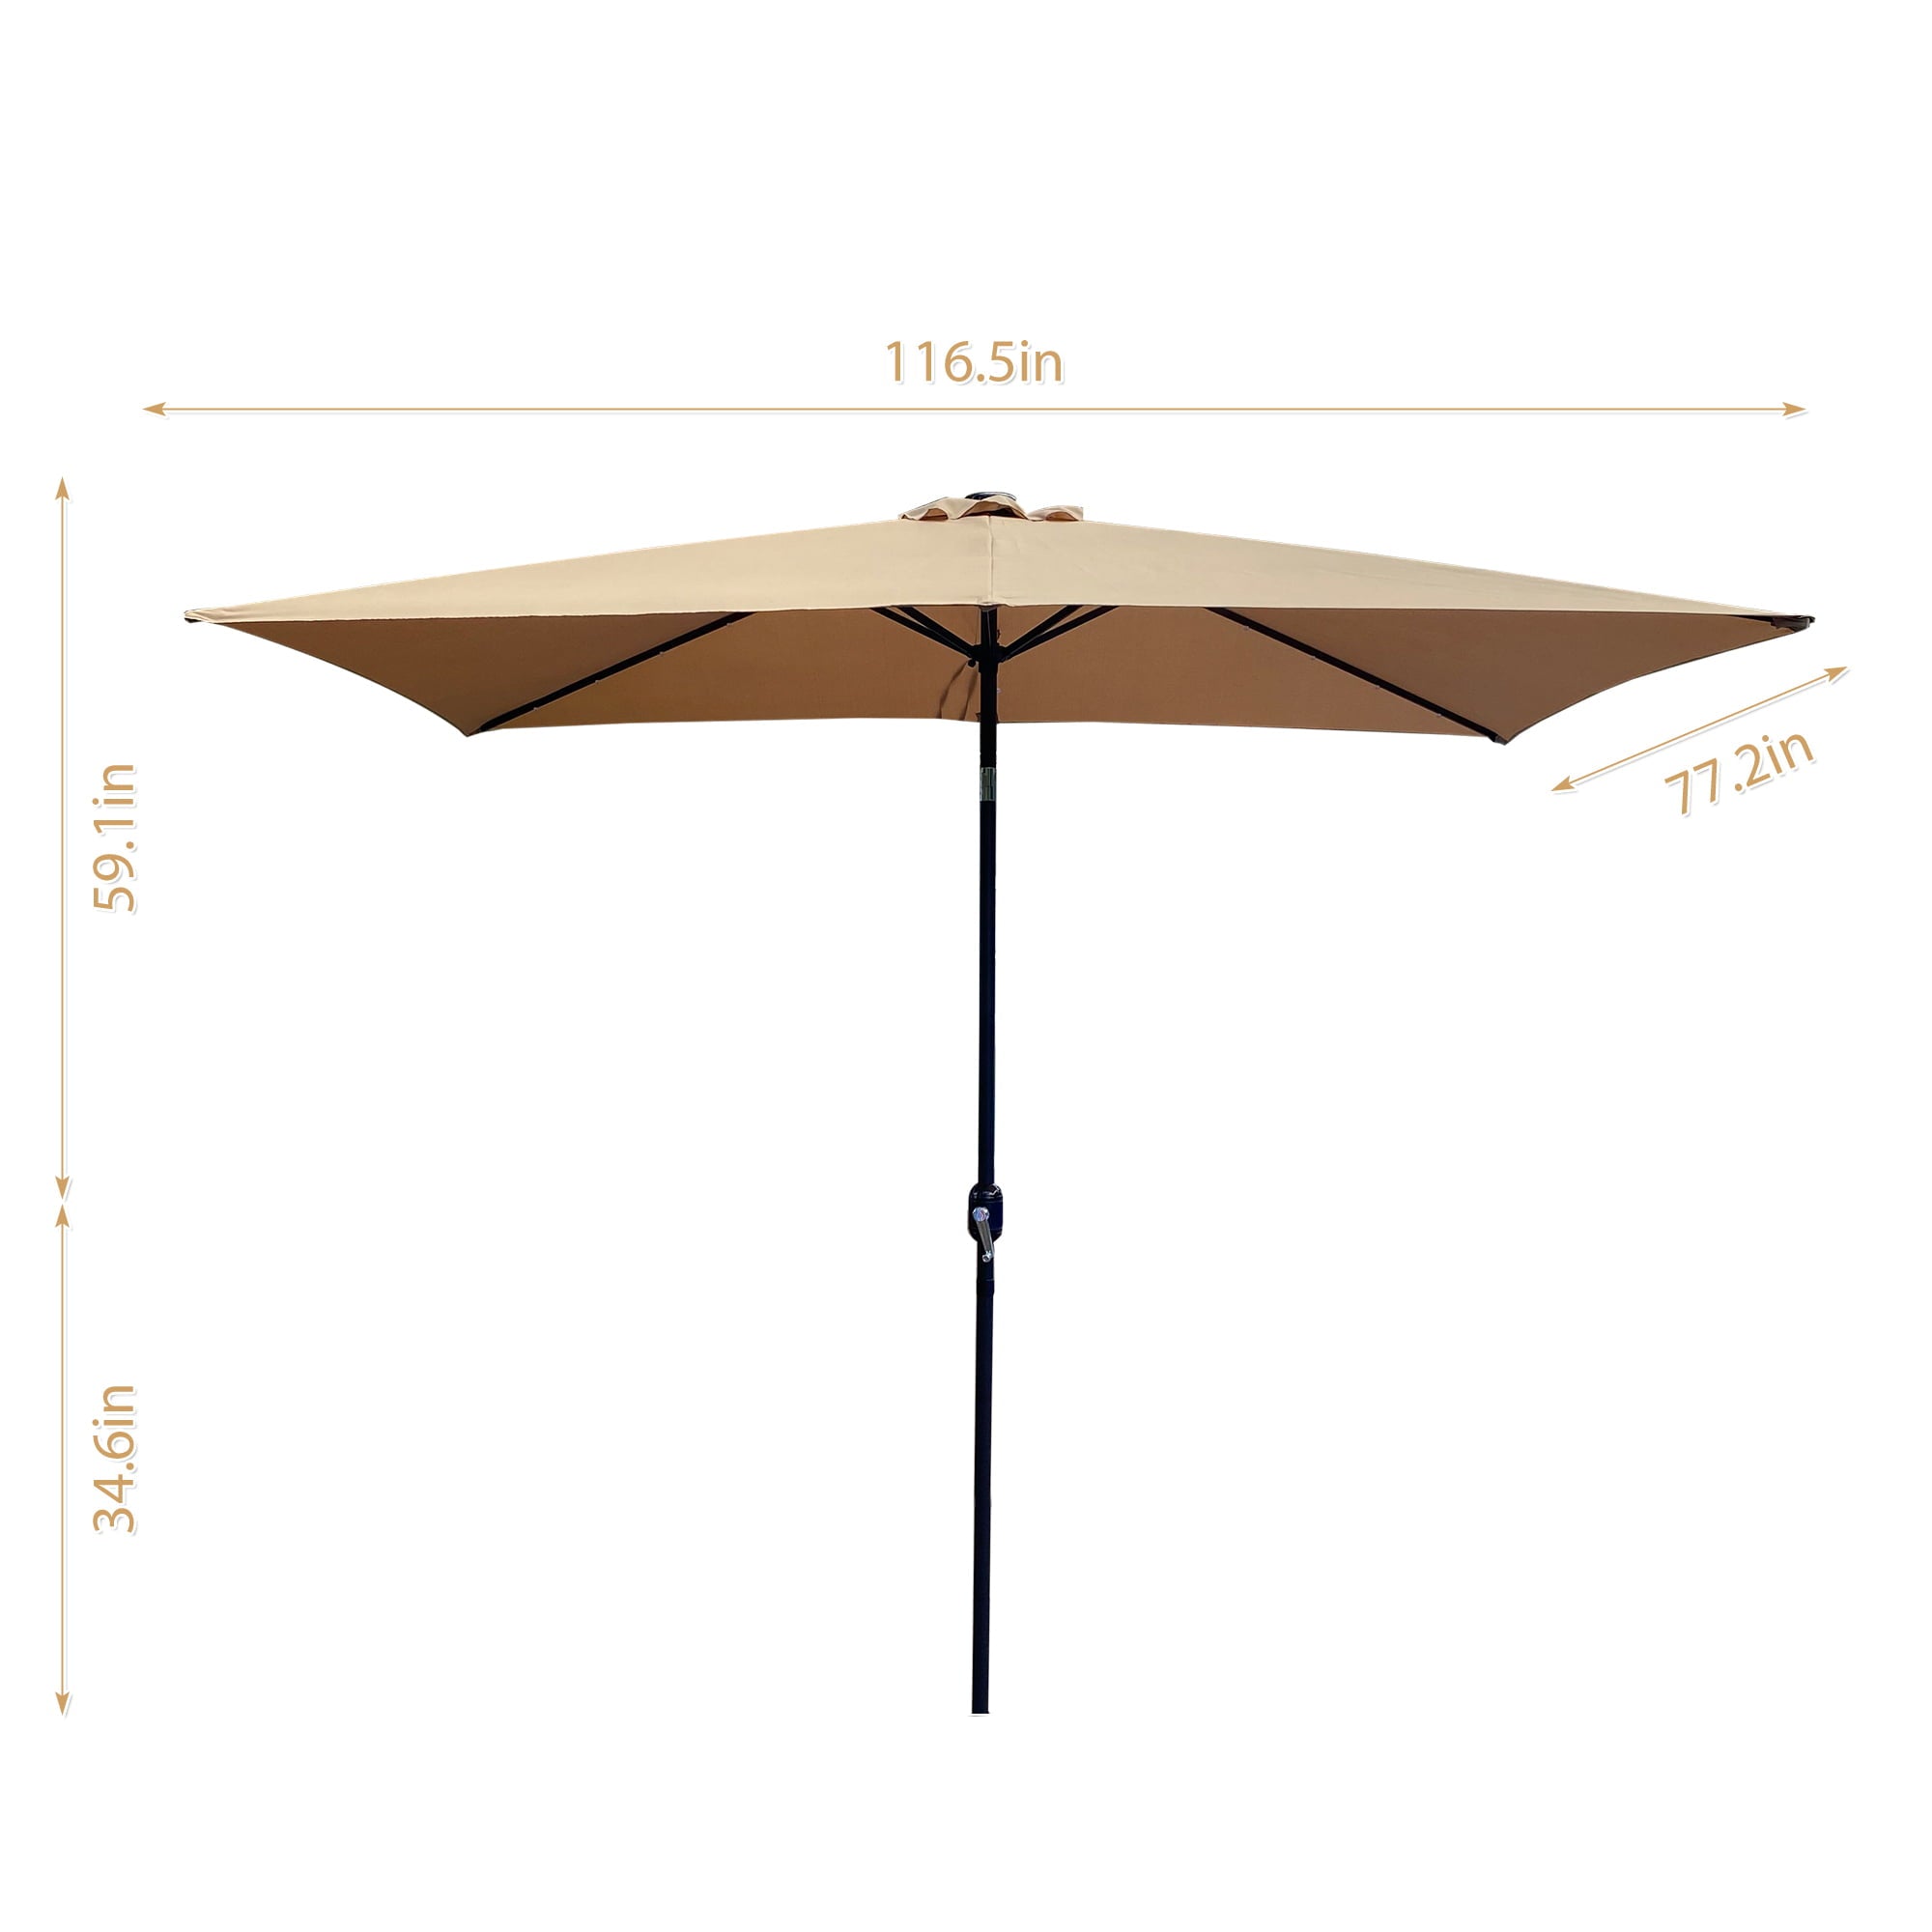 10x6.5ft Outdoor Rectangle Solar Powered LED Lighted Patio Umbrella with Crank Tilt for Table Market Beach Pool Taupe